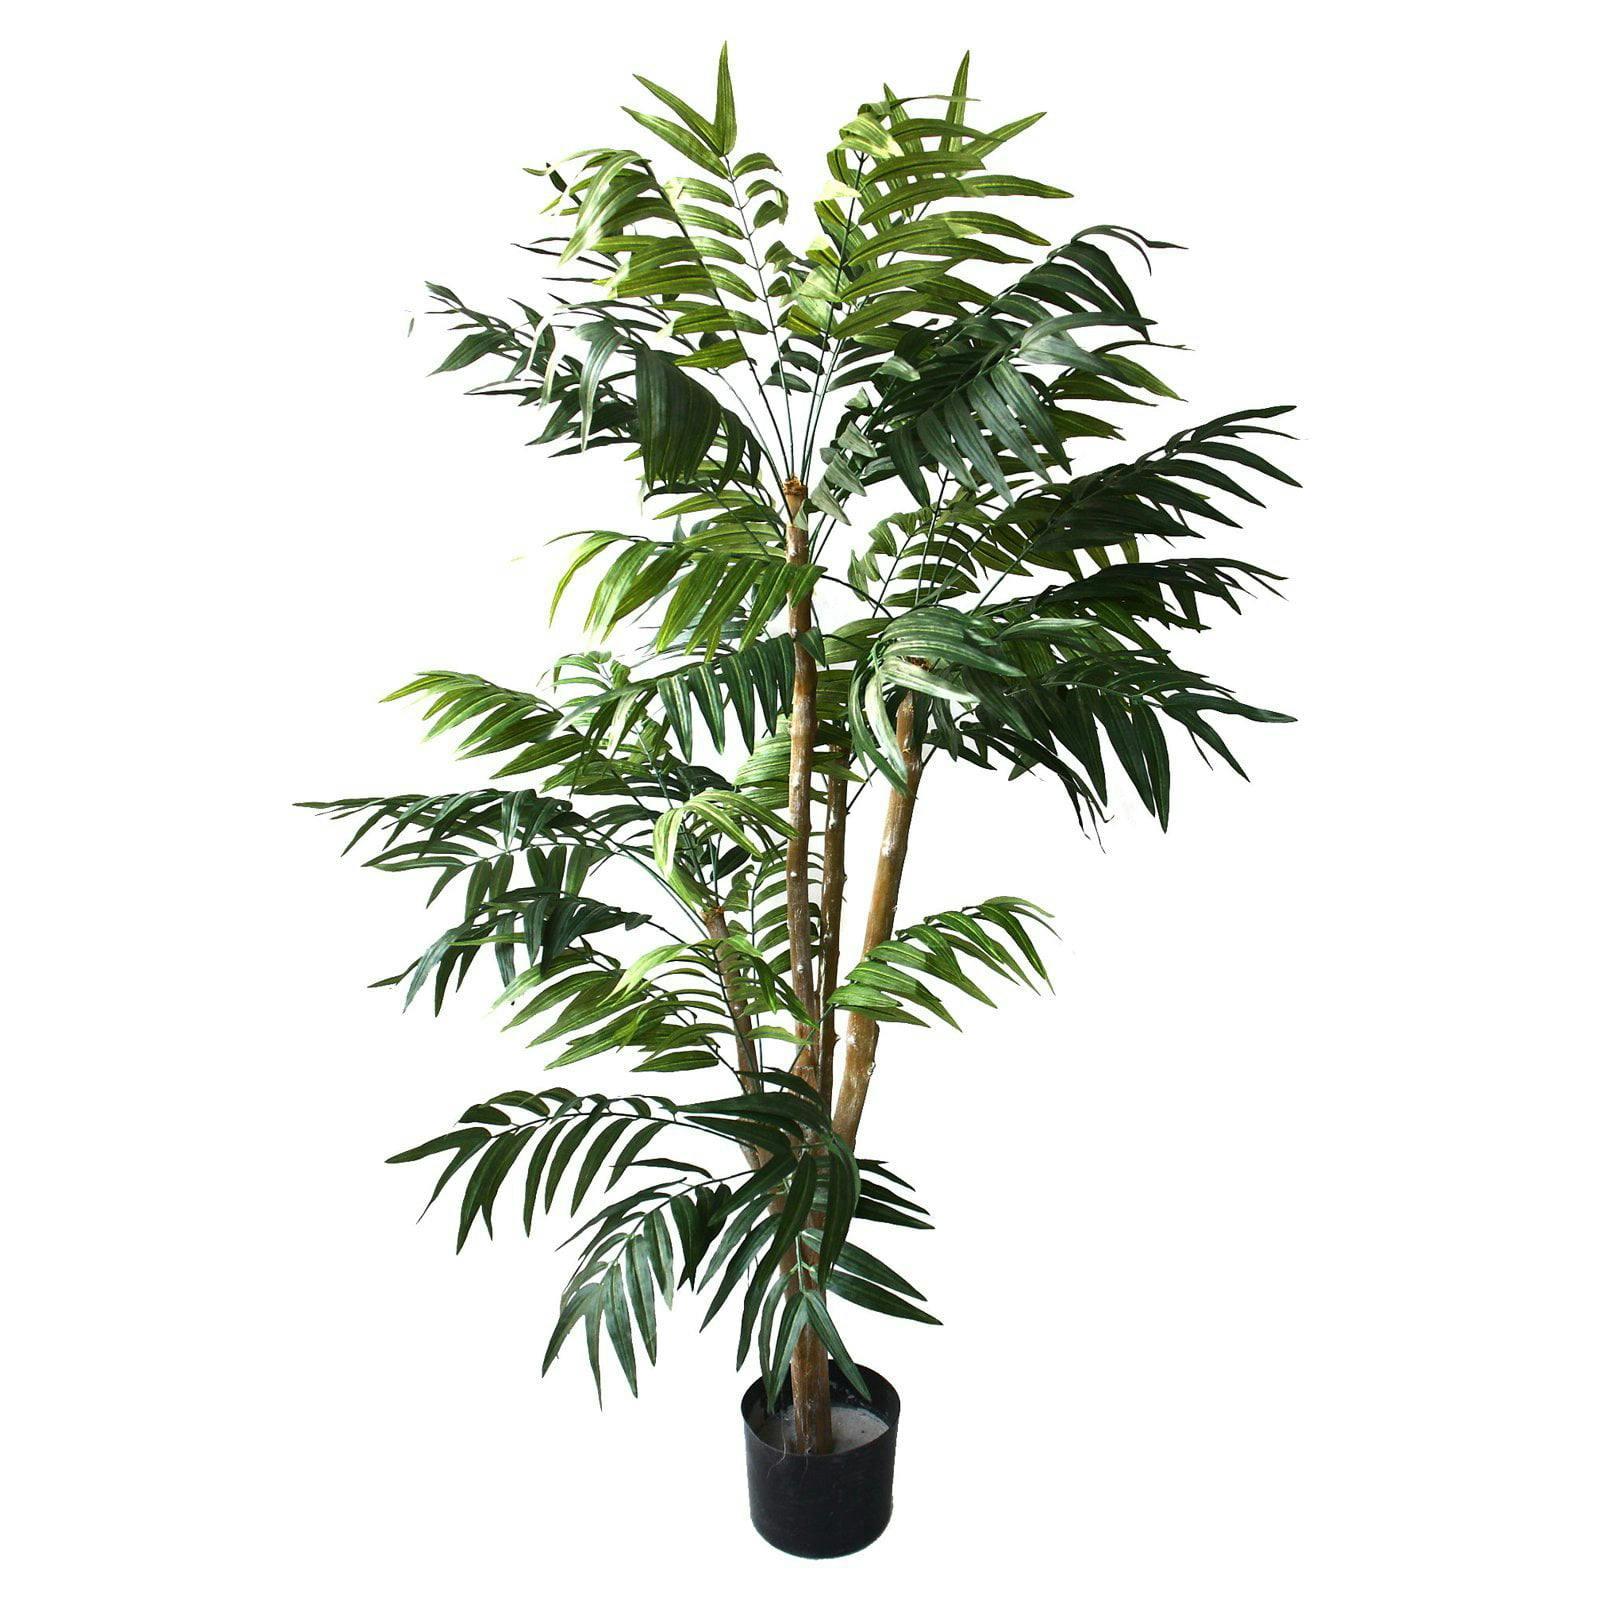 Evergreen Palm 60" Lush Tropical Indoor/Outdoor Tree